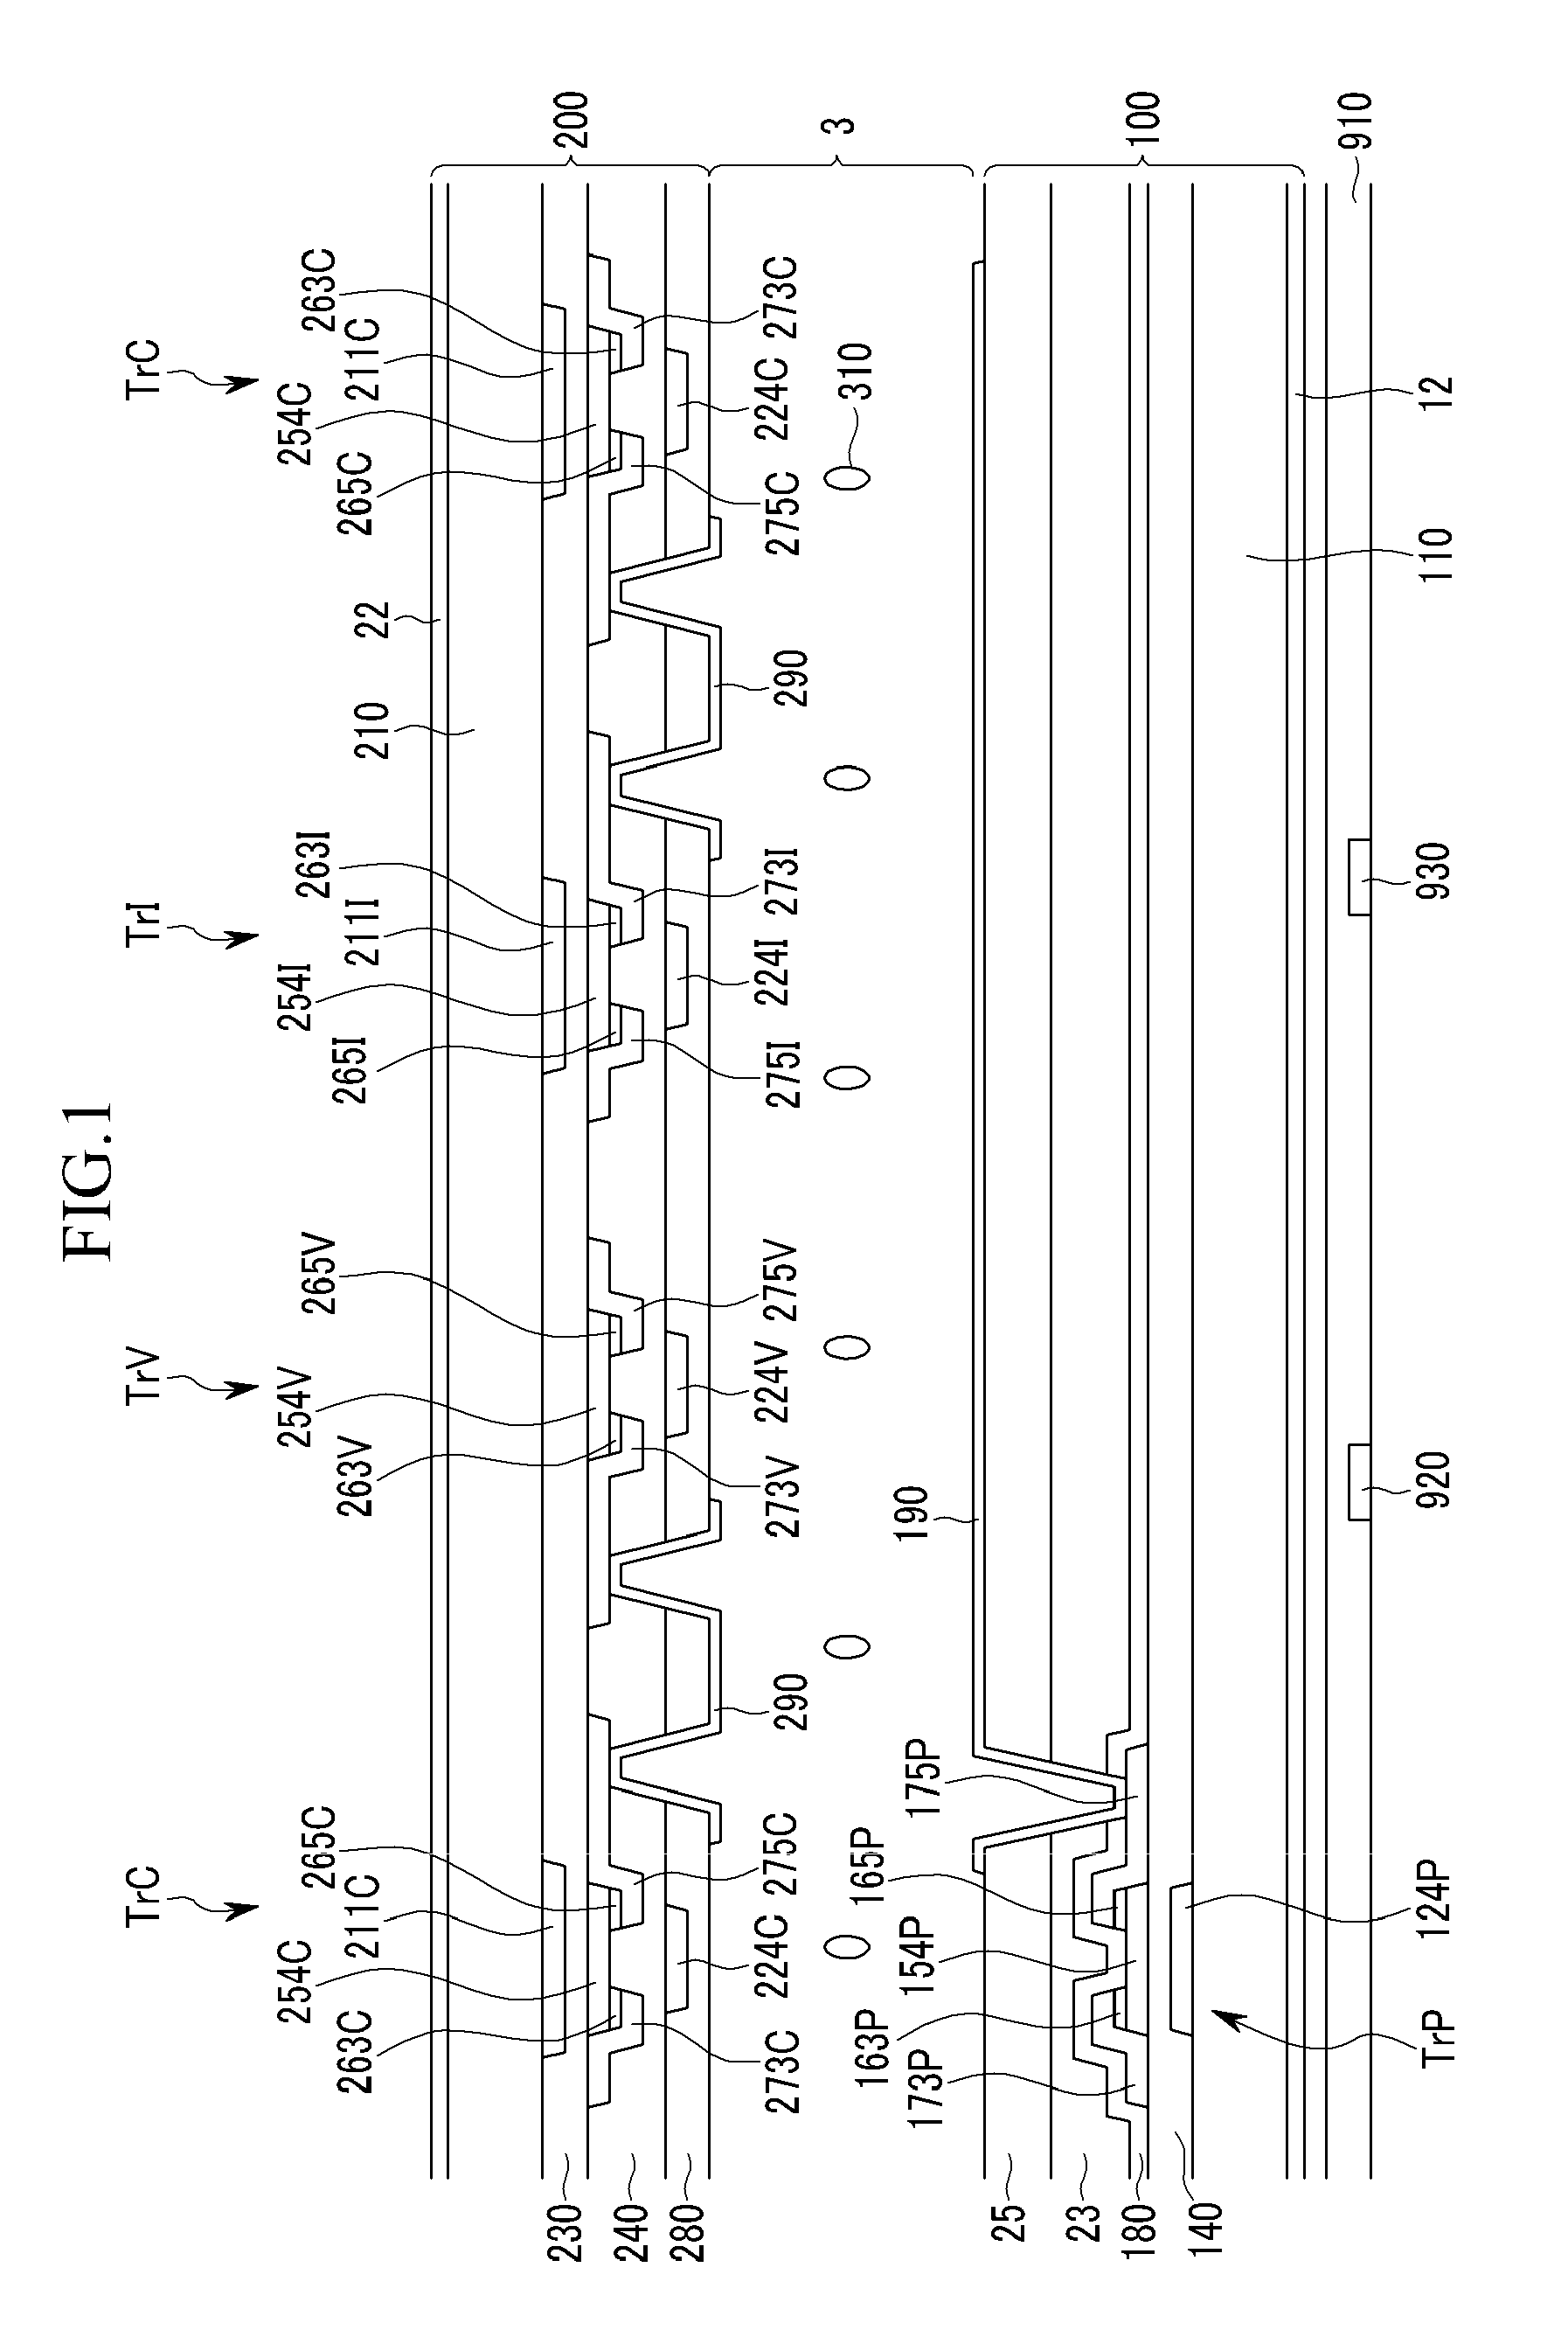 Display device with improved sensing mechanism